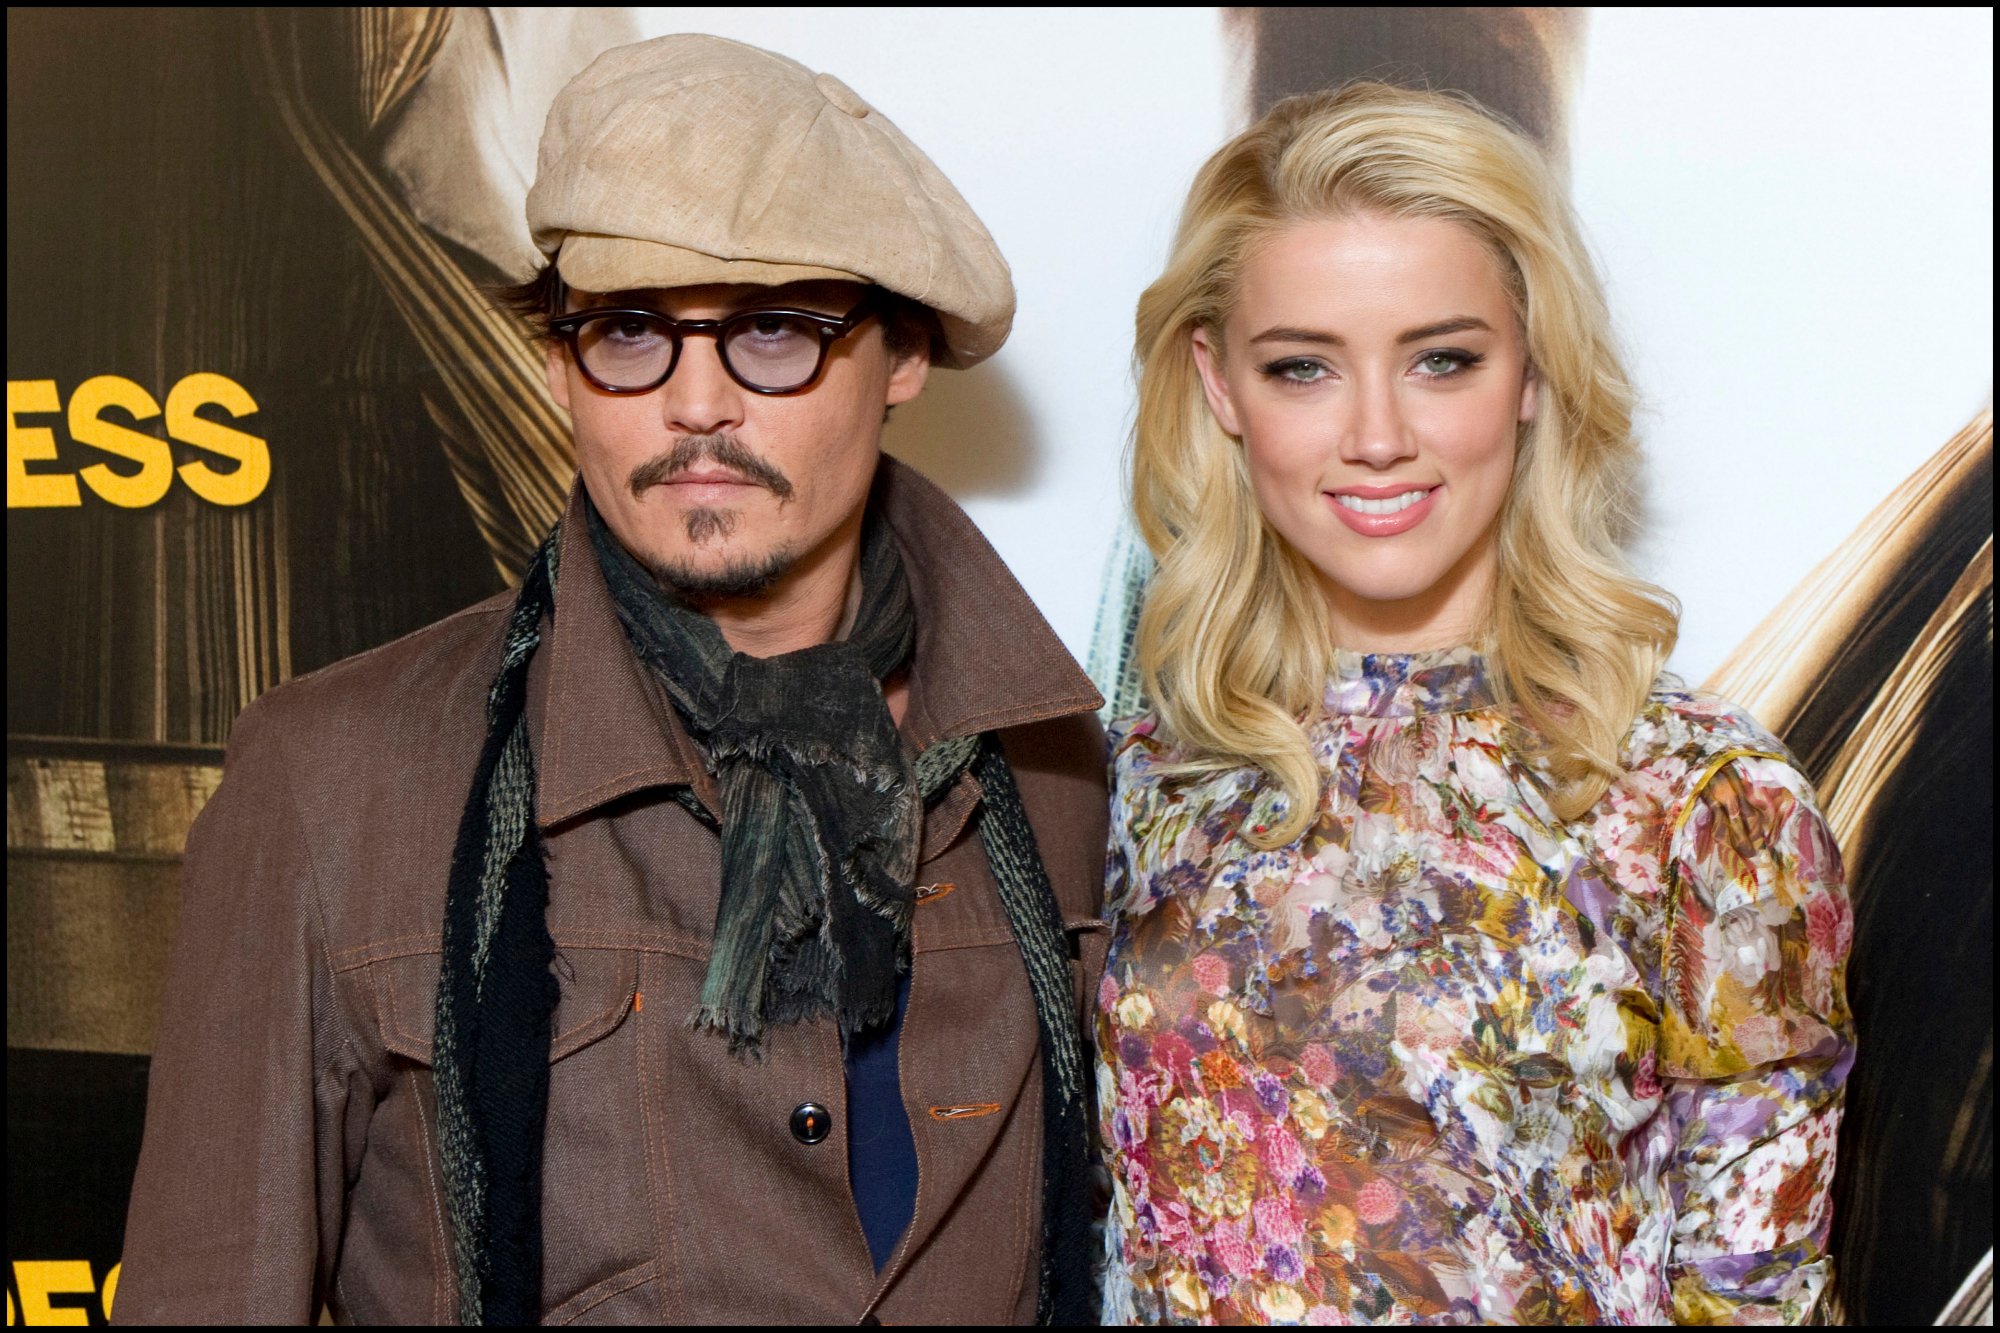 'The Rum Diary' actors Johnny Depp and Amber Heard posing in at the photo call